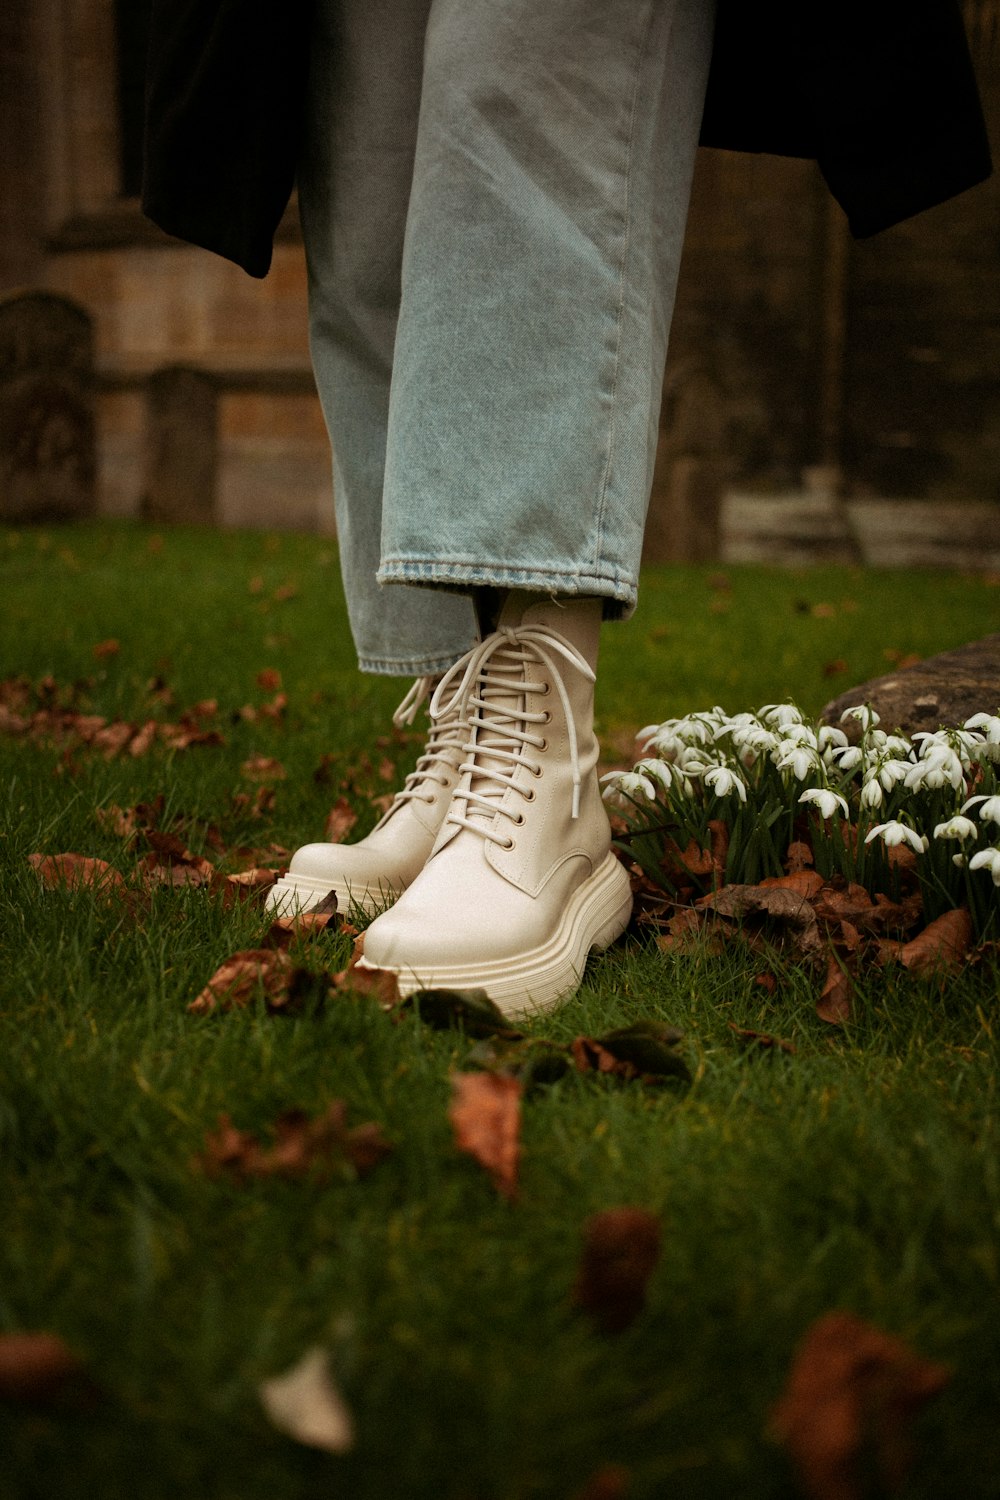 a person's feet in white shoes on grass